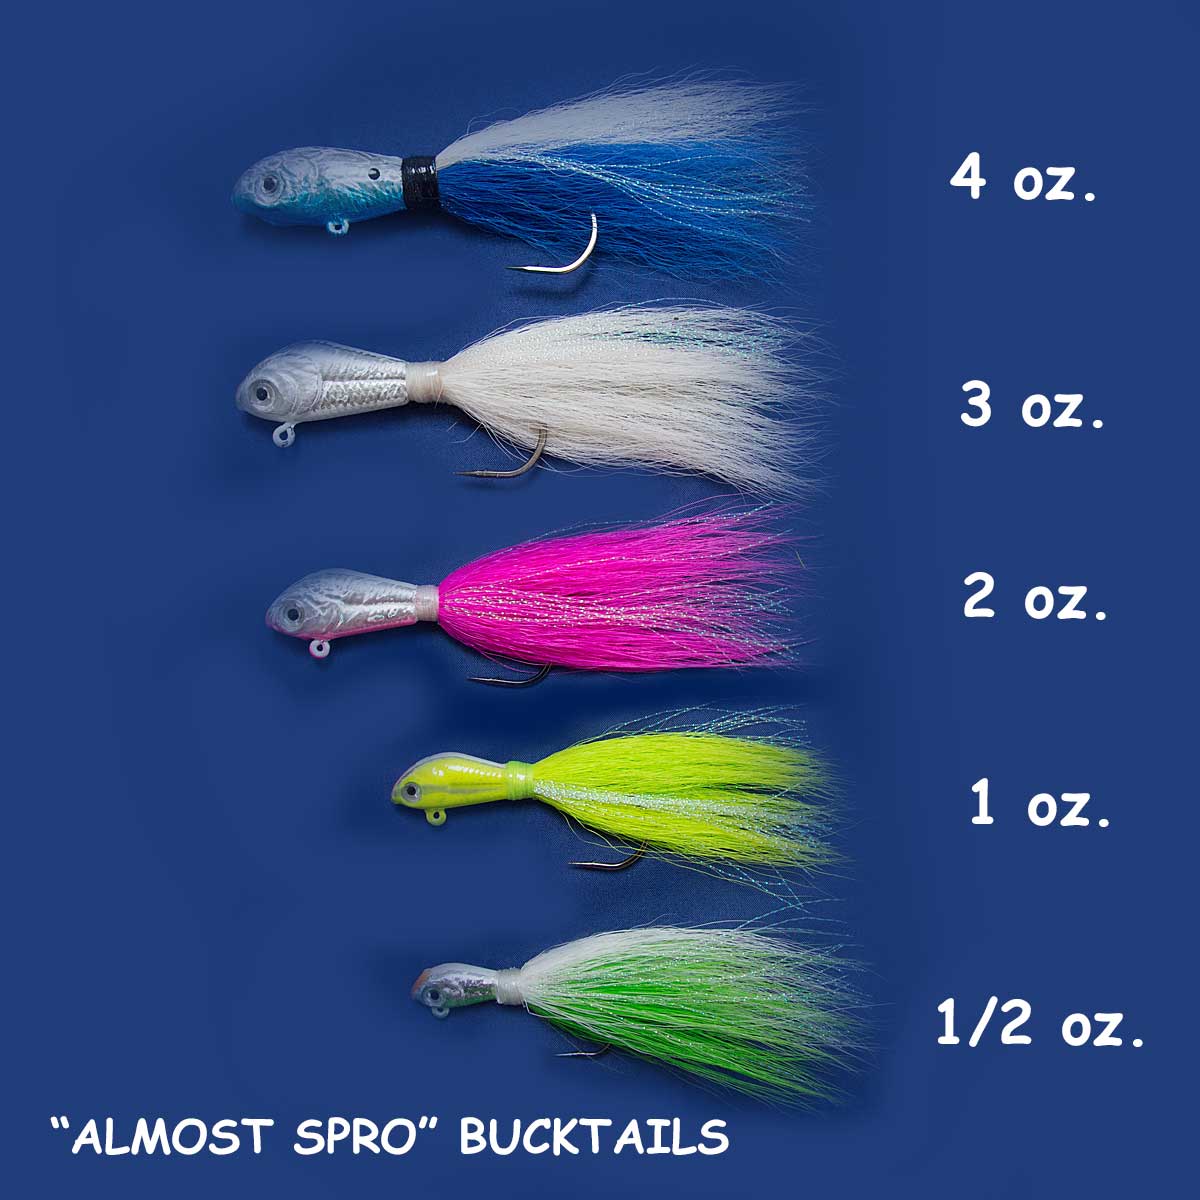 NEW!!! "Almost Spro" Bucktail Rigs